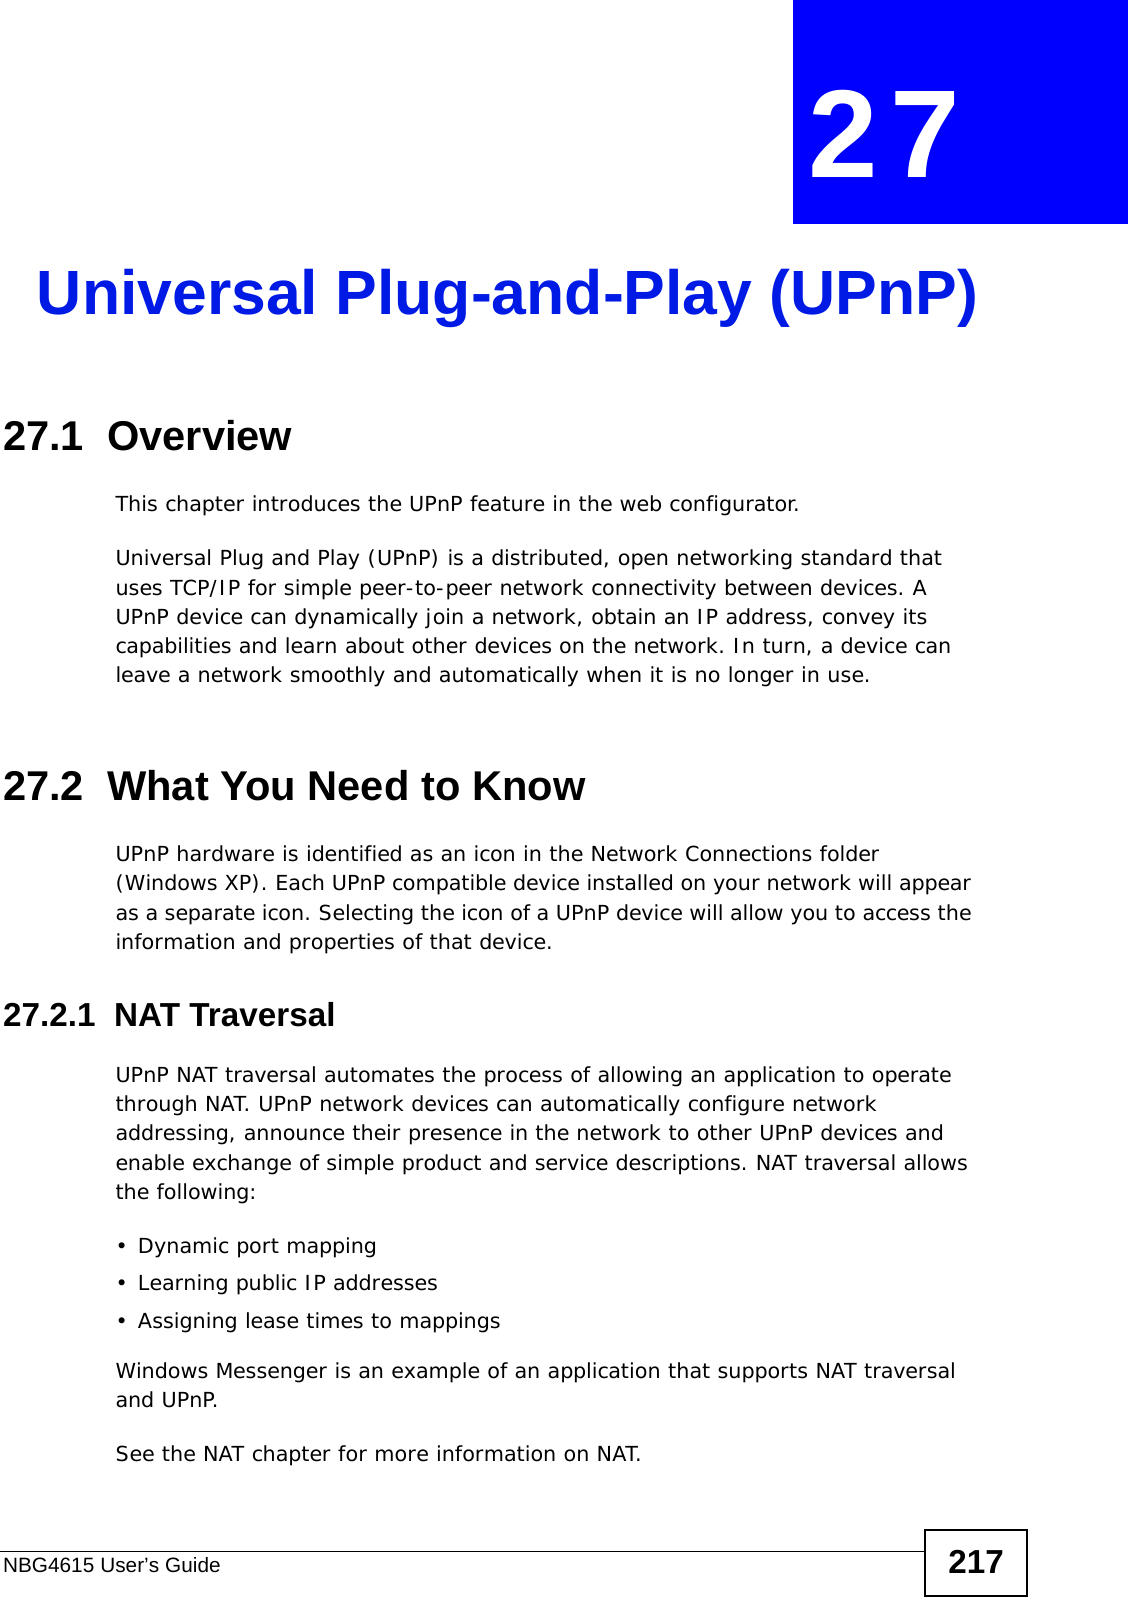 NBG4615 User’s Guide 217CHAPTER  27 Universal Plug-and-Play (UPnP)27.1  Overview This chapter introduces the UPnP feature in the web configurator.Universal Plug and Play (UPnP) is a distributed, open networking standard that uses TCP/IP for simple peer-to-peer network connectivity between devices. A UPnP device can dynamically join a network, obtain an IP address, convey its capabilities and learn about other devices on the network. In turn, a device can leave a network smoothly and automatically when it is no longer in use.27.2  What You Need to KnowUPnP hardware is identified as an icon in the Network Connections folder (Windows XP). Each UPnP compatible device installed on your network will appear as a separate icon. Selecting the icon of a UPnP device will allow you to access the information and properties of that device. 27.2.1  NAT TraversalUPnP NAT traversal automates the process of allowing an application to operate through NAT. UPnP network devices can automatically configure network addressing, announce their presence in the network to other UPnP devices and enable exchange of simple product and service descriptions. NAT traversal allows the following:• Dynamic port mapping• Learning public IP addresses• Assigning lease times to mappingsWindows Messenger is an example of an application that supports NAT traversal and UPnP. See the NAT chapter for more information on NAT.